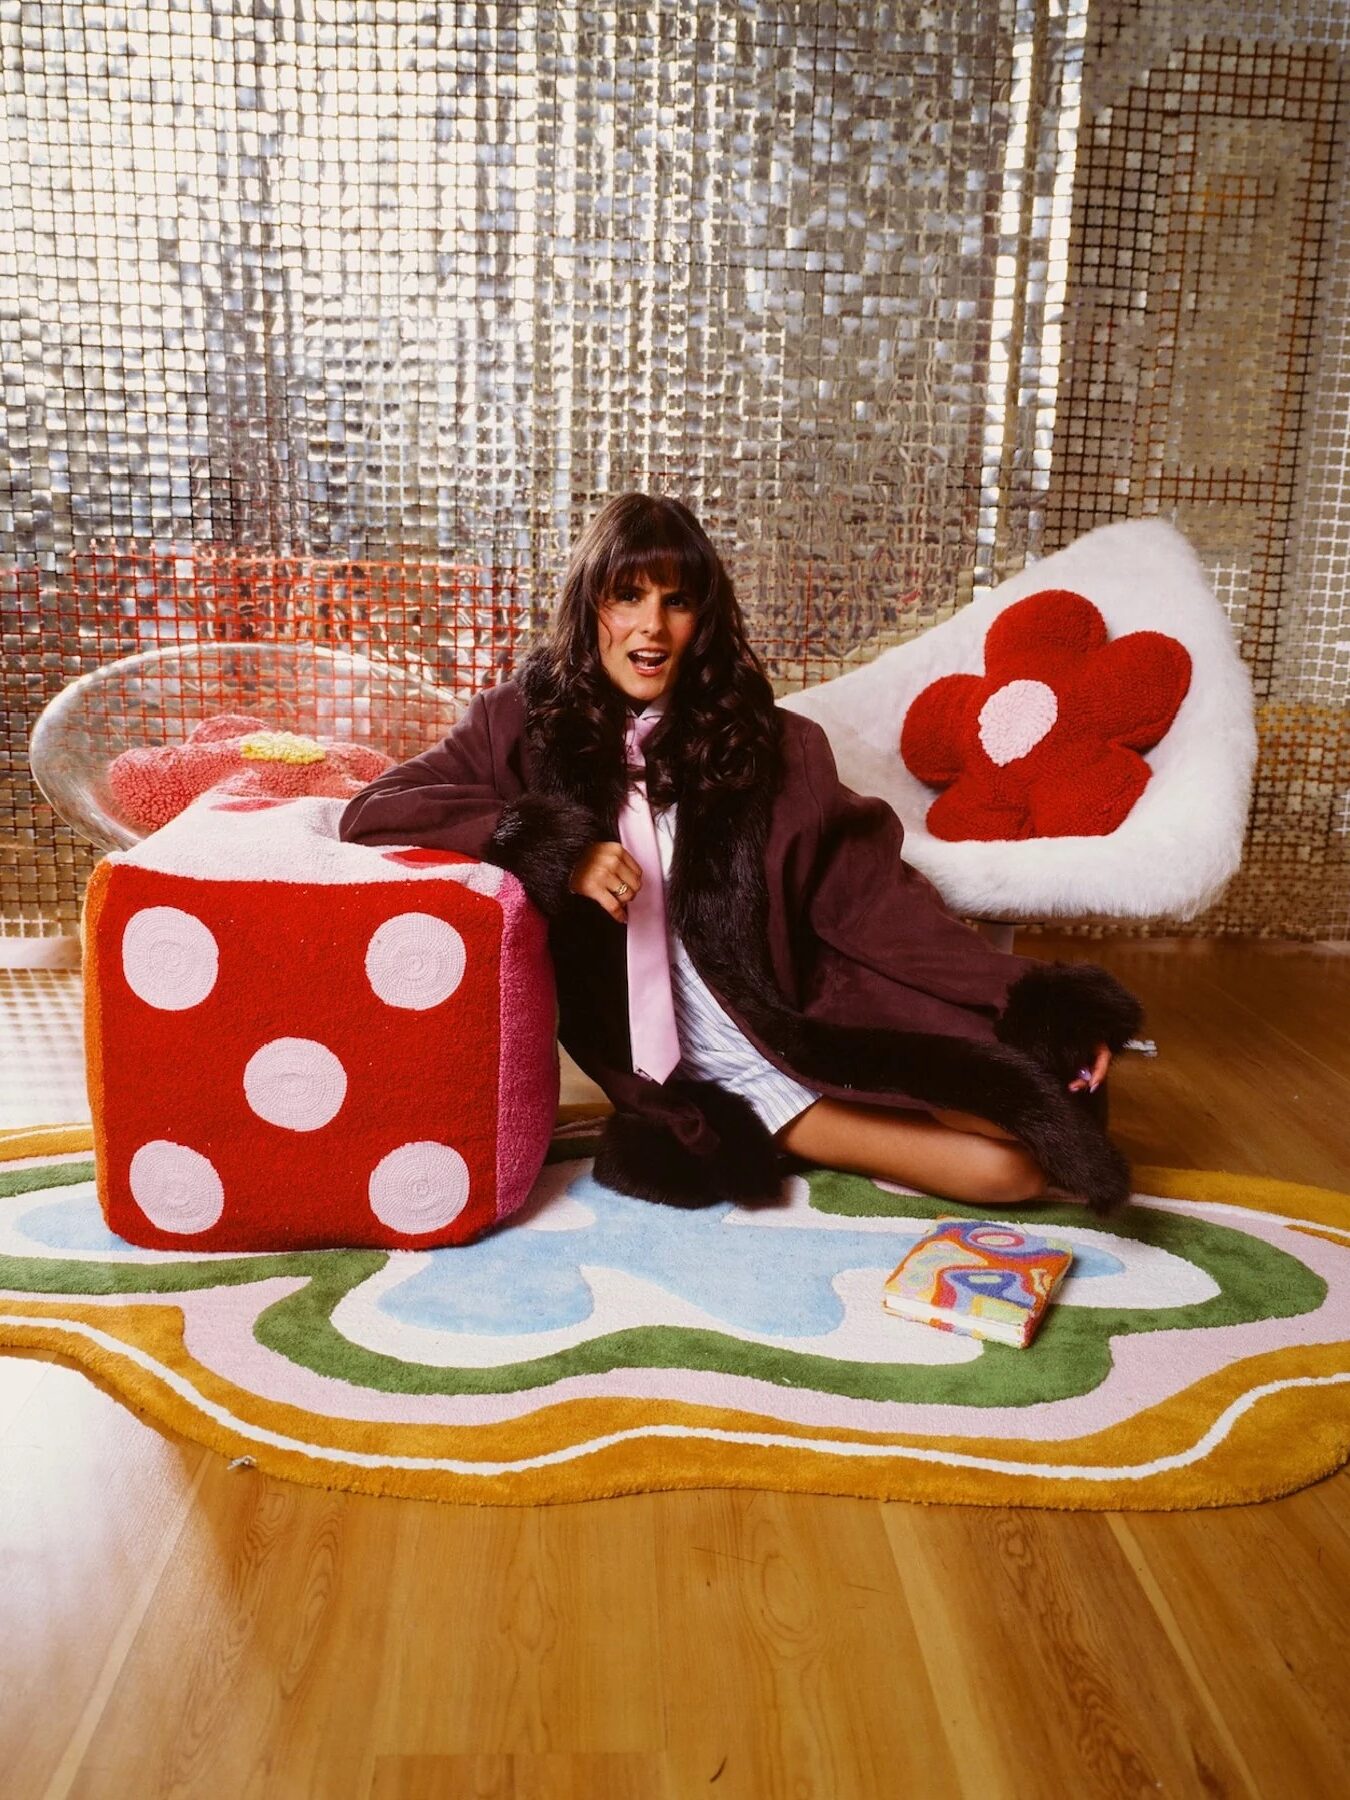 Woman in a chic coat seated on a flower-shaped rug near a large dice and a reflective backdrop, holding a phone and smiling.